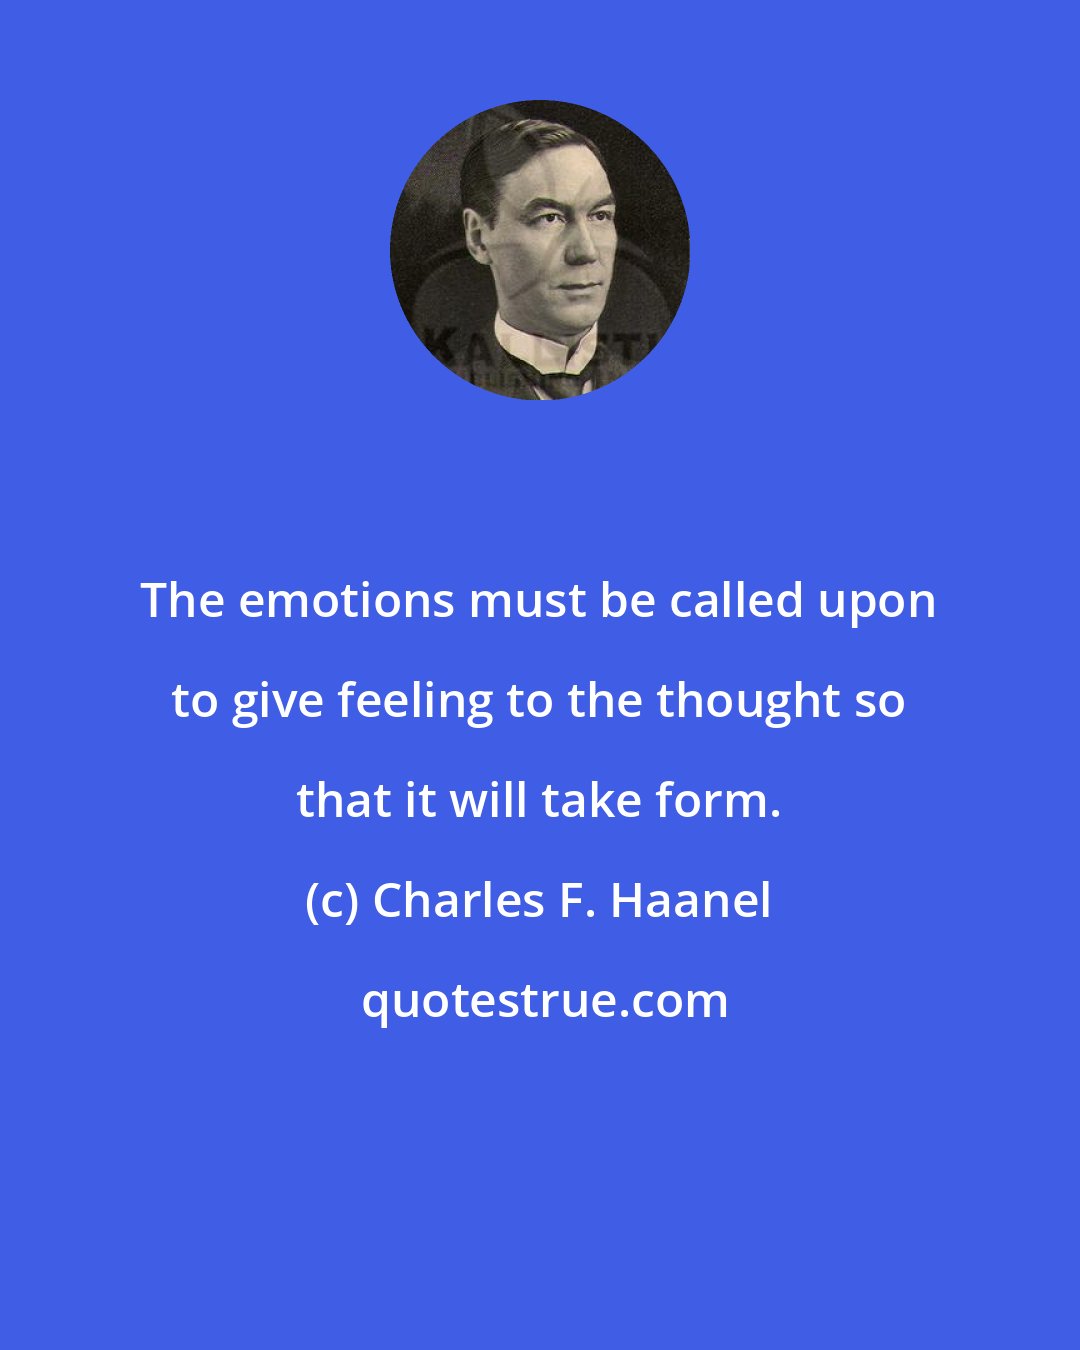 Charles F. Haanel: The emotions must be called upon to give feeling to the thought so that it will take form.